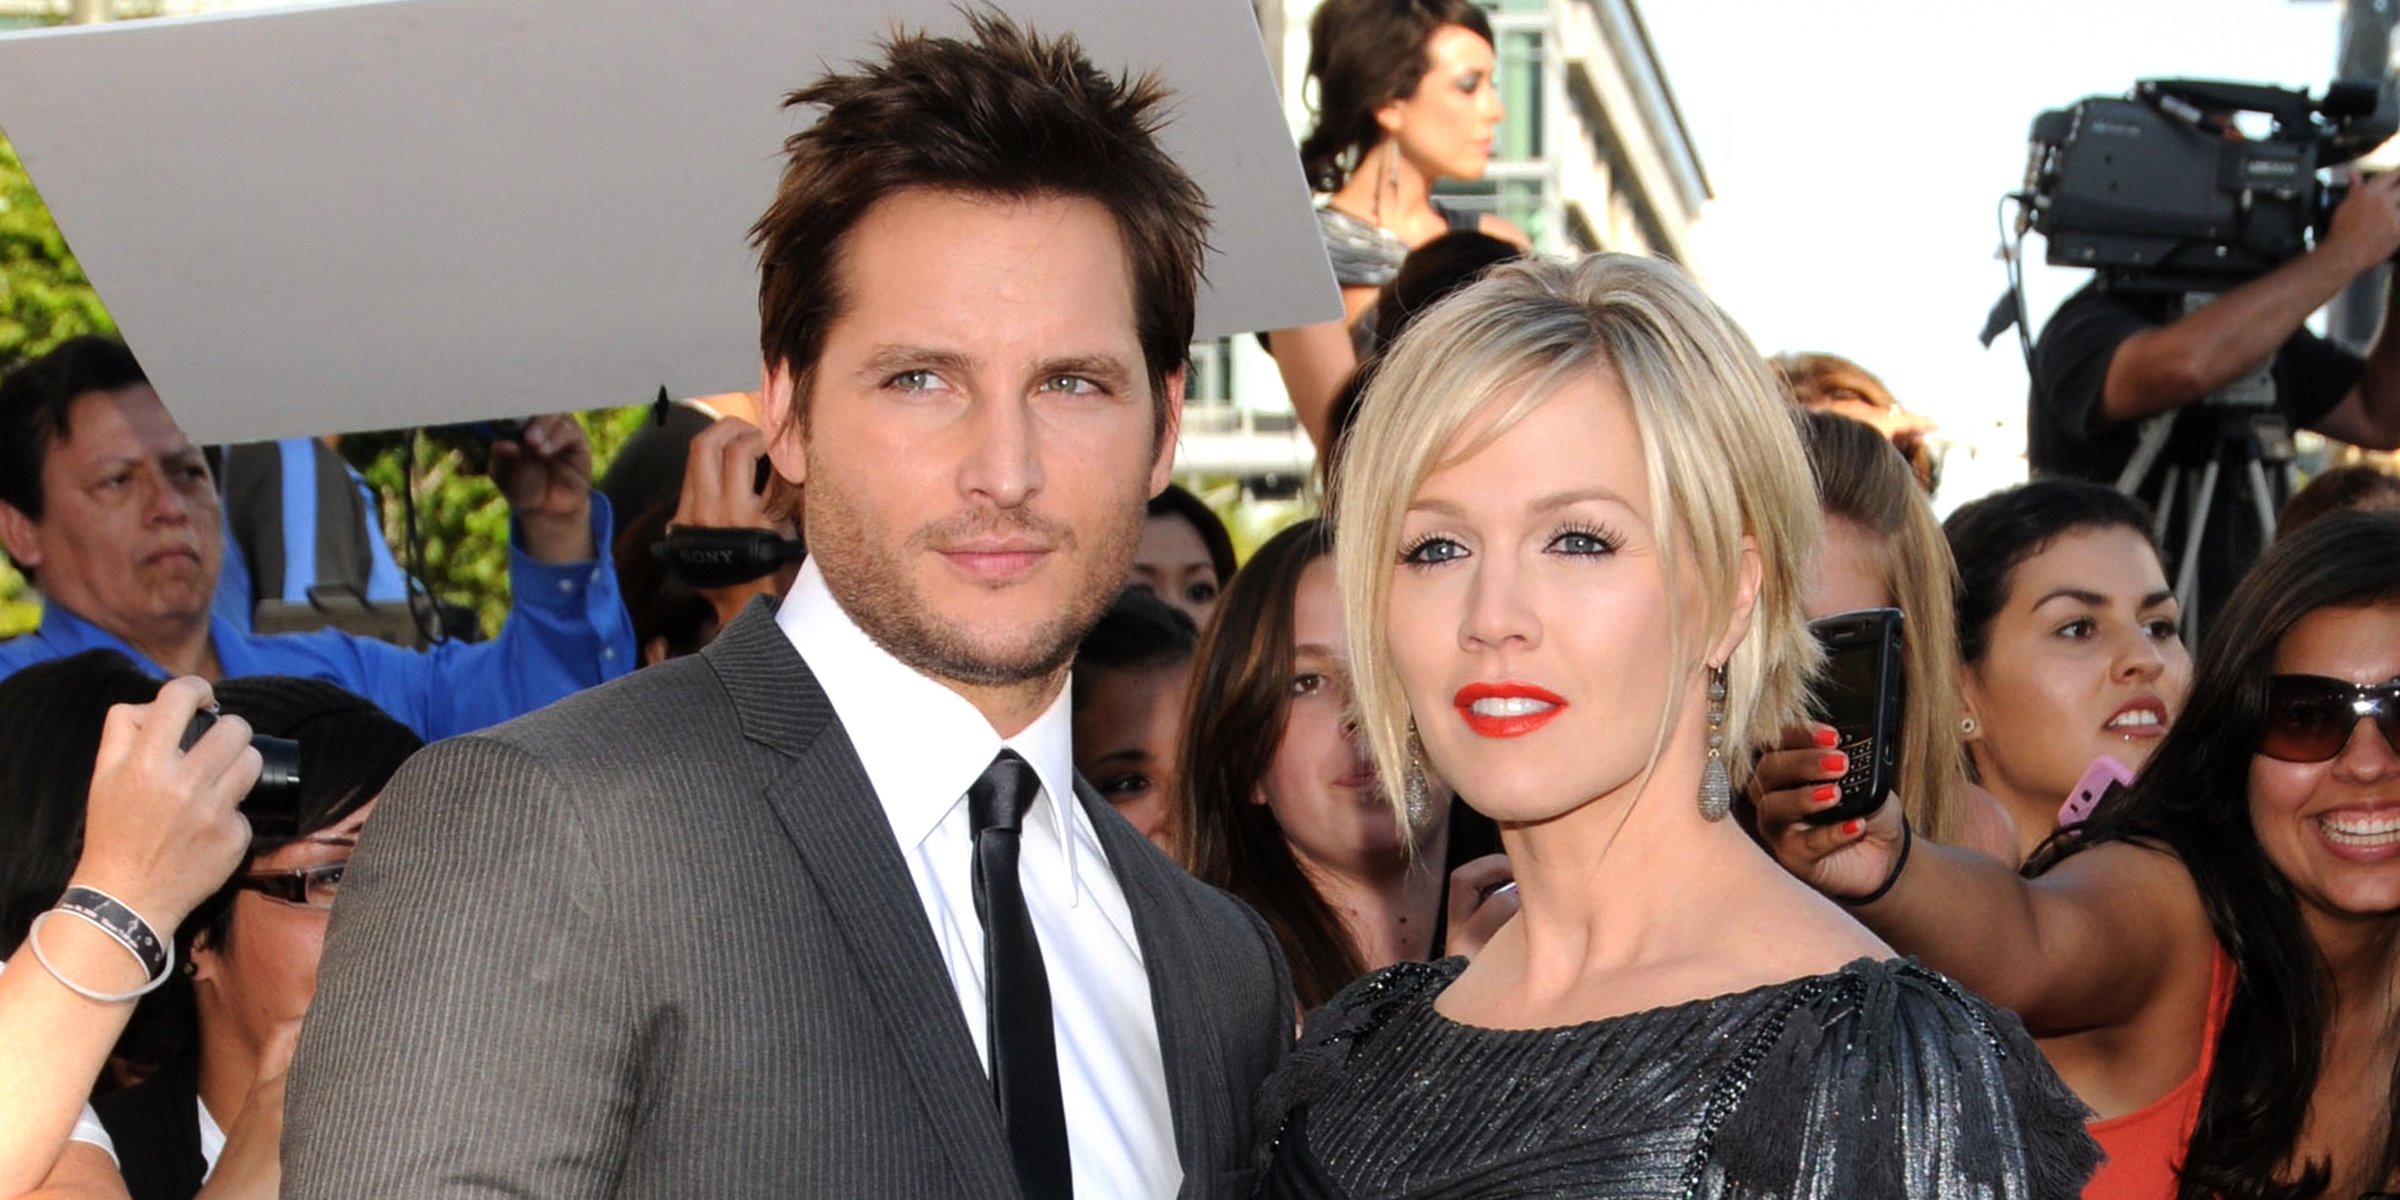 Peter Facinelli and Jennie Garth | Source: Getty Images